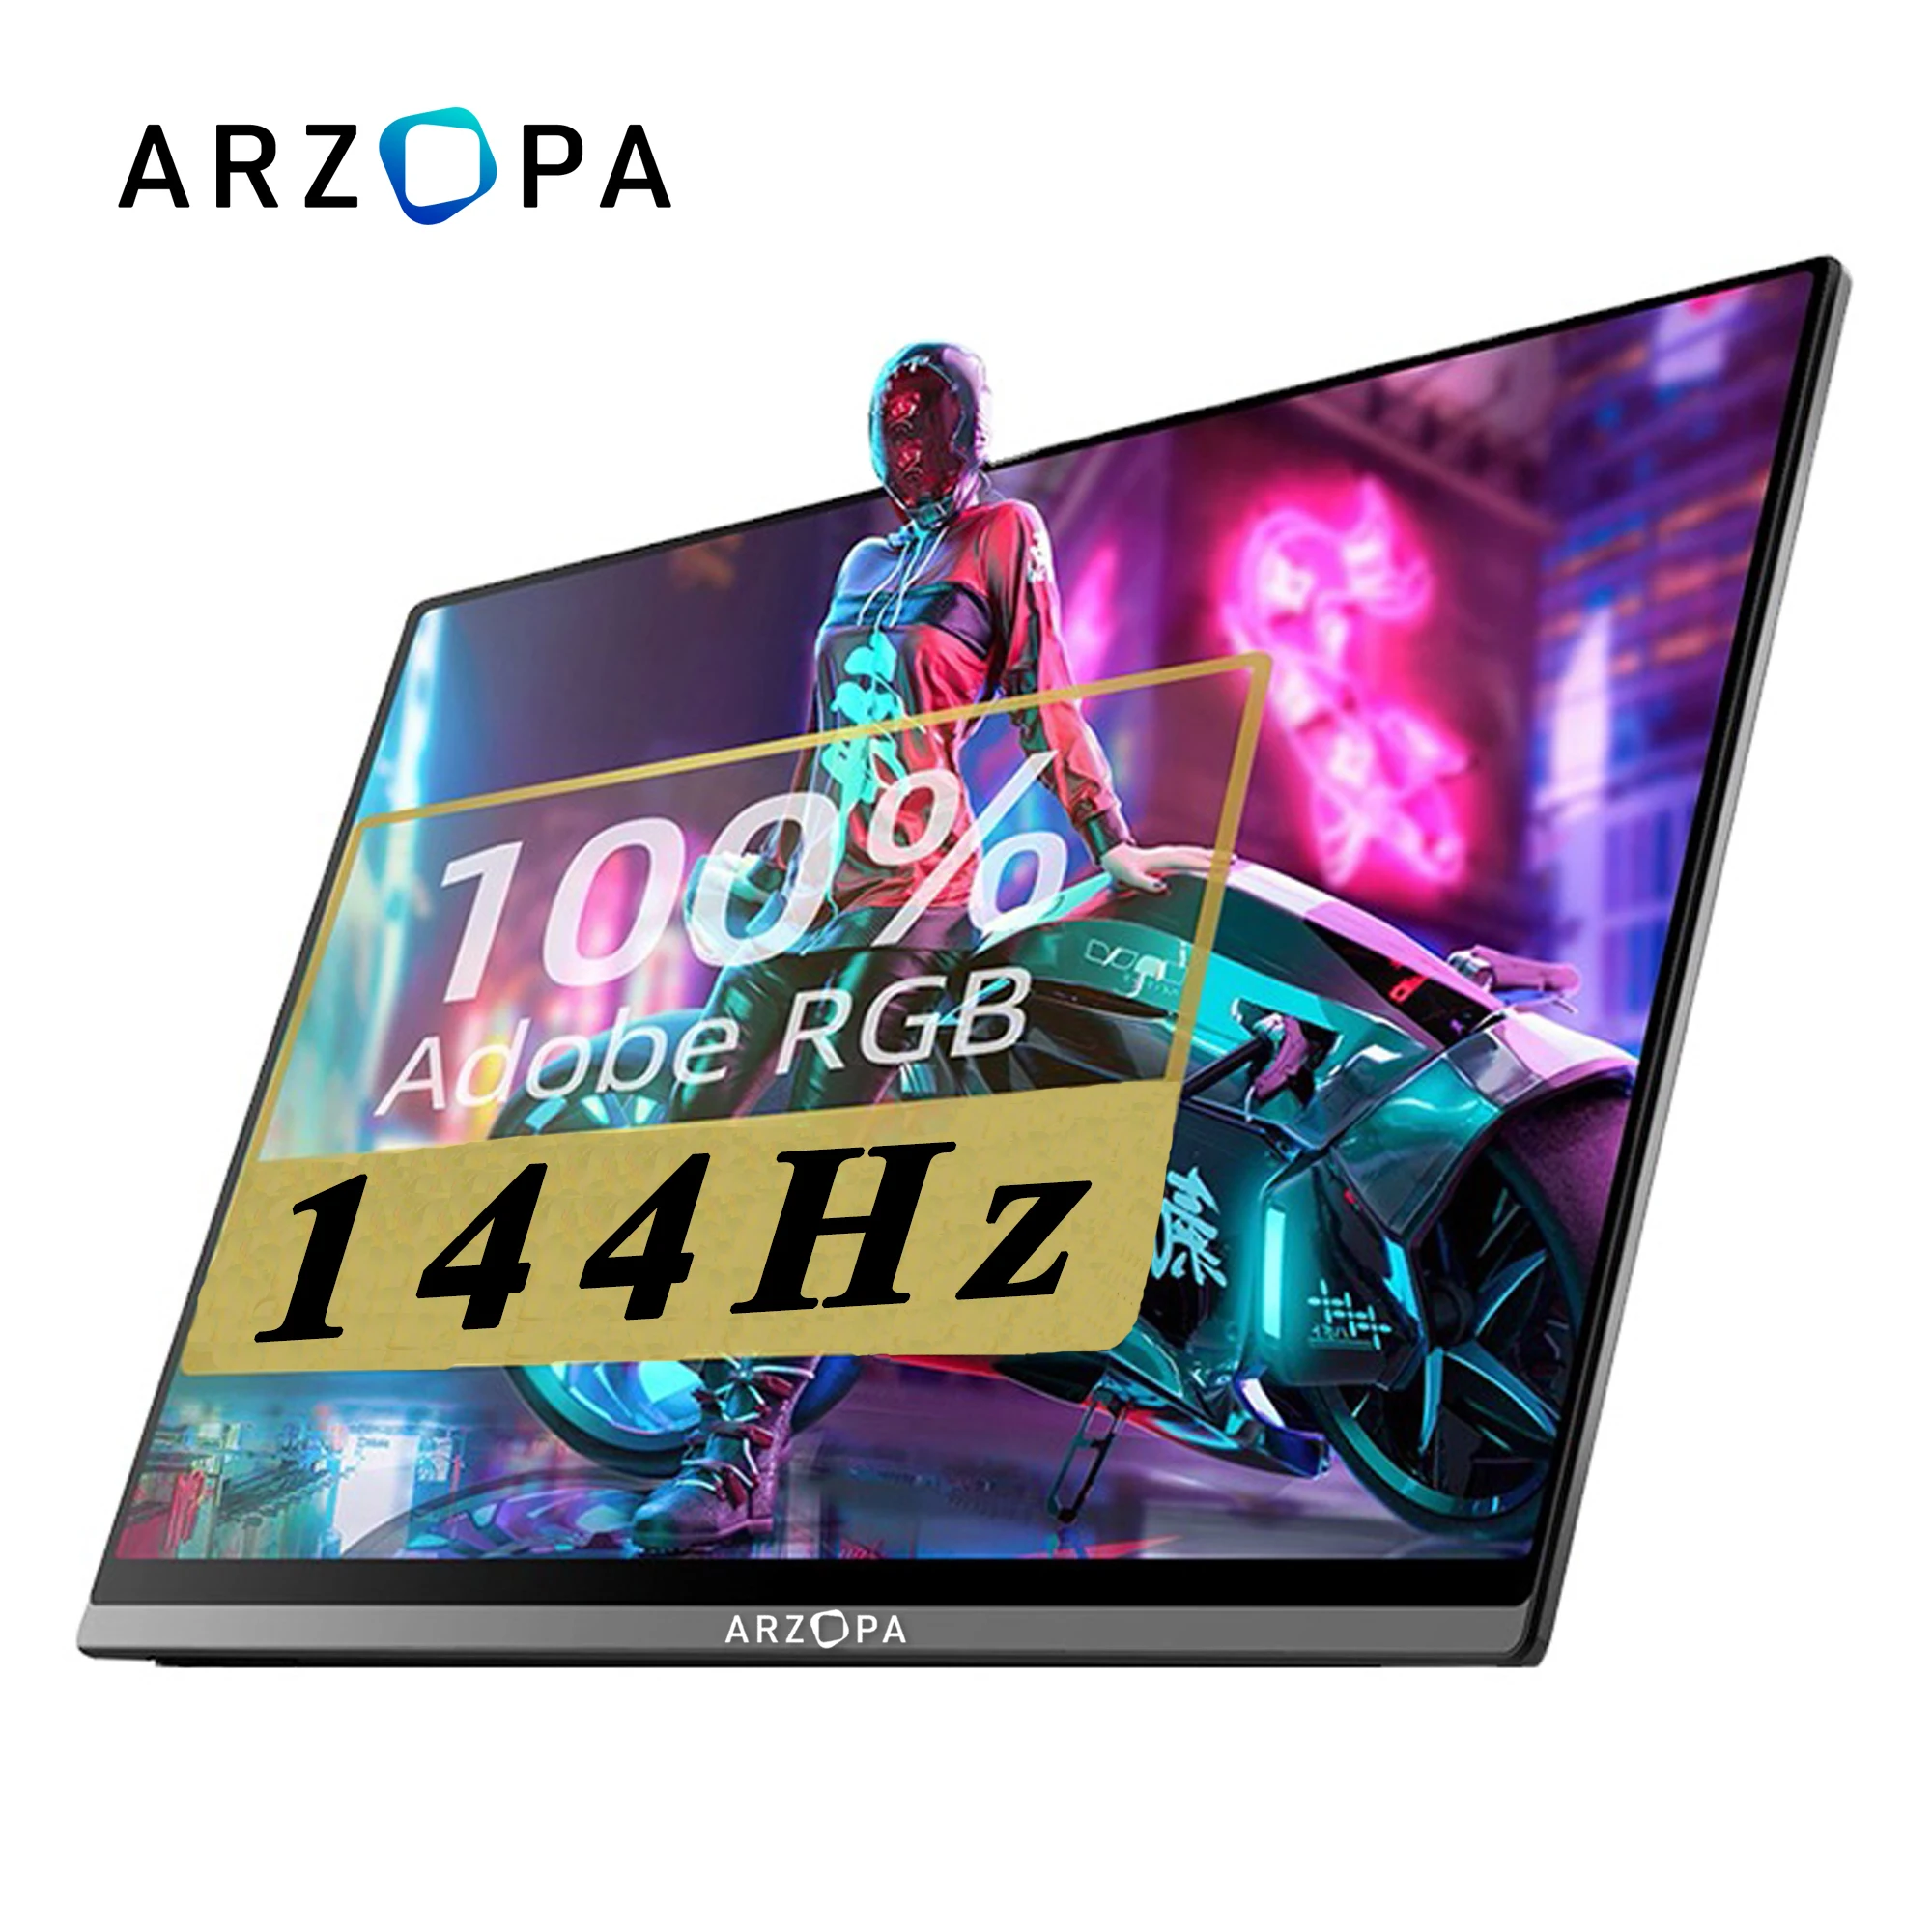 

Arzopa 15.6" 1080P IPS Laptop Portable Display 144Hz Monitor Gaming with FreeSync USB Type C for Mobile PC